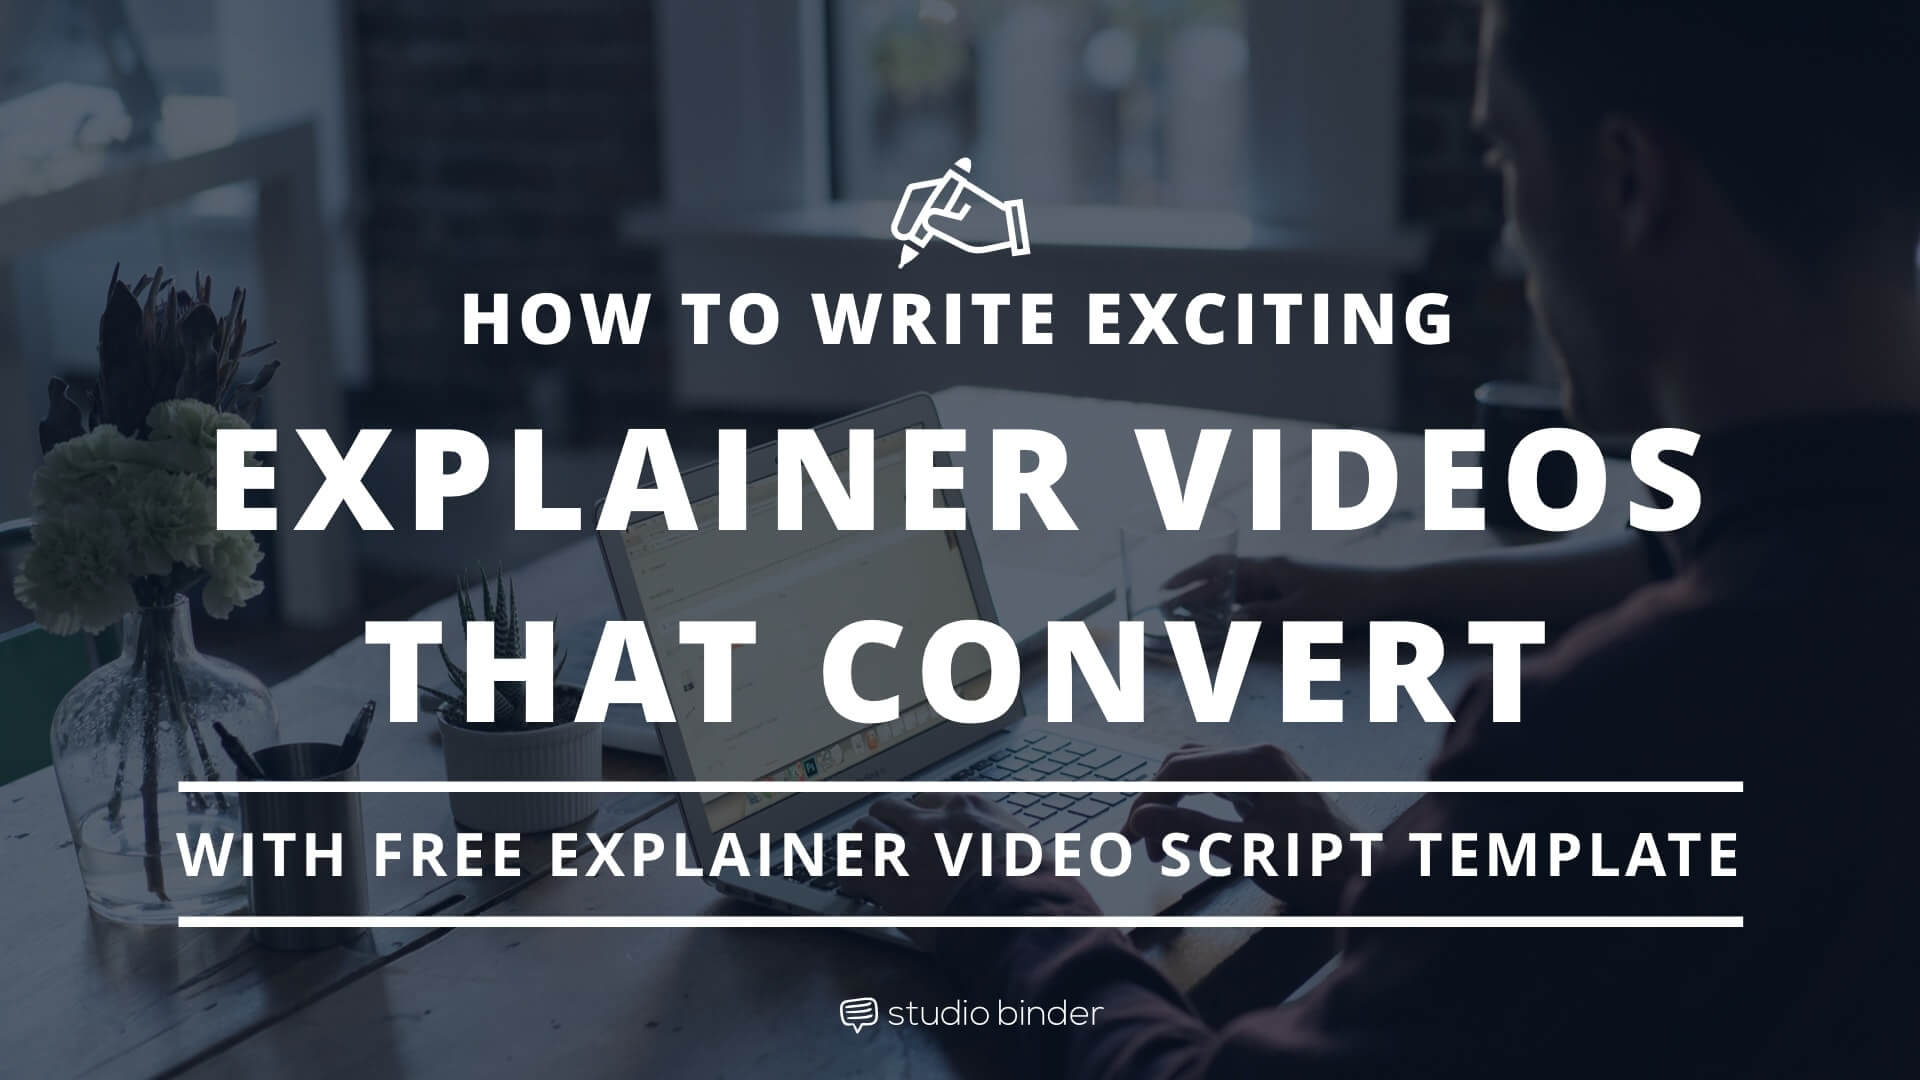 How to Write Exciting Explainer Explainer Videos That Convert (with FREE Explainer Video Script Template) - Social - StudioBinder